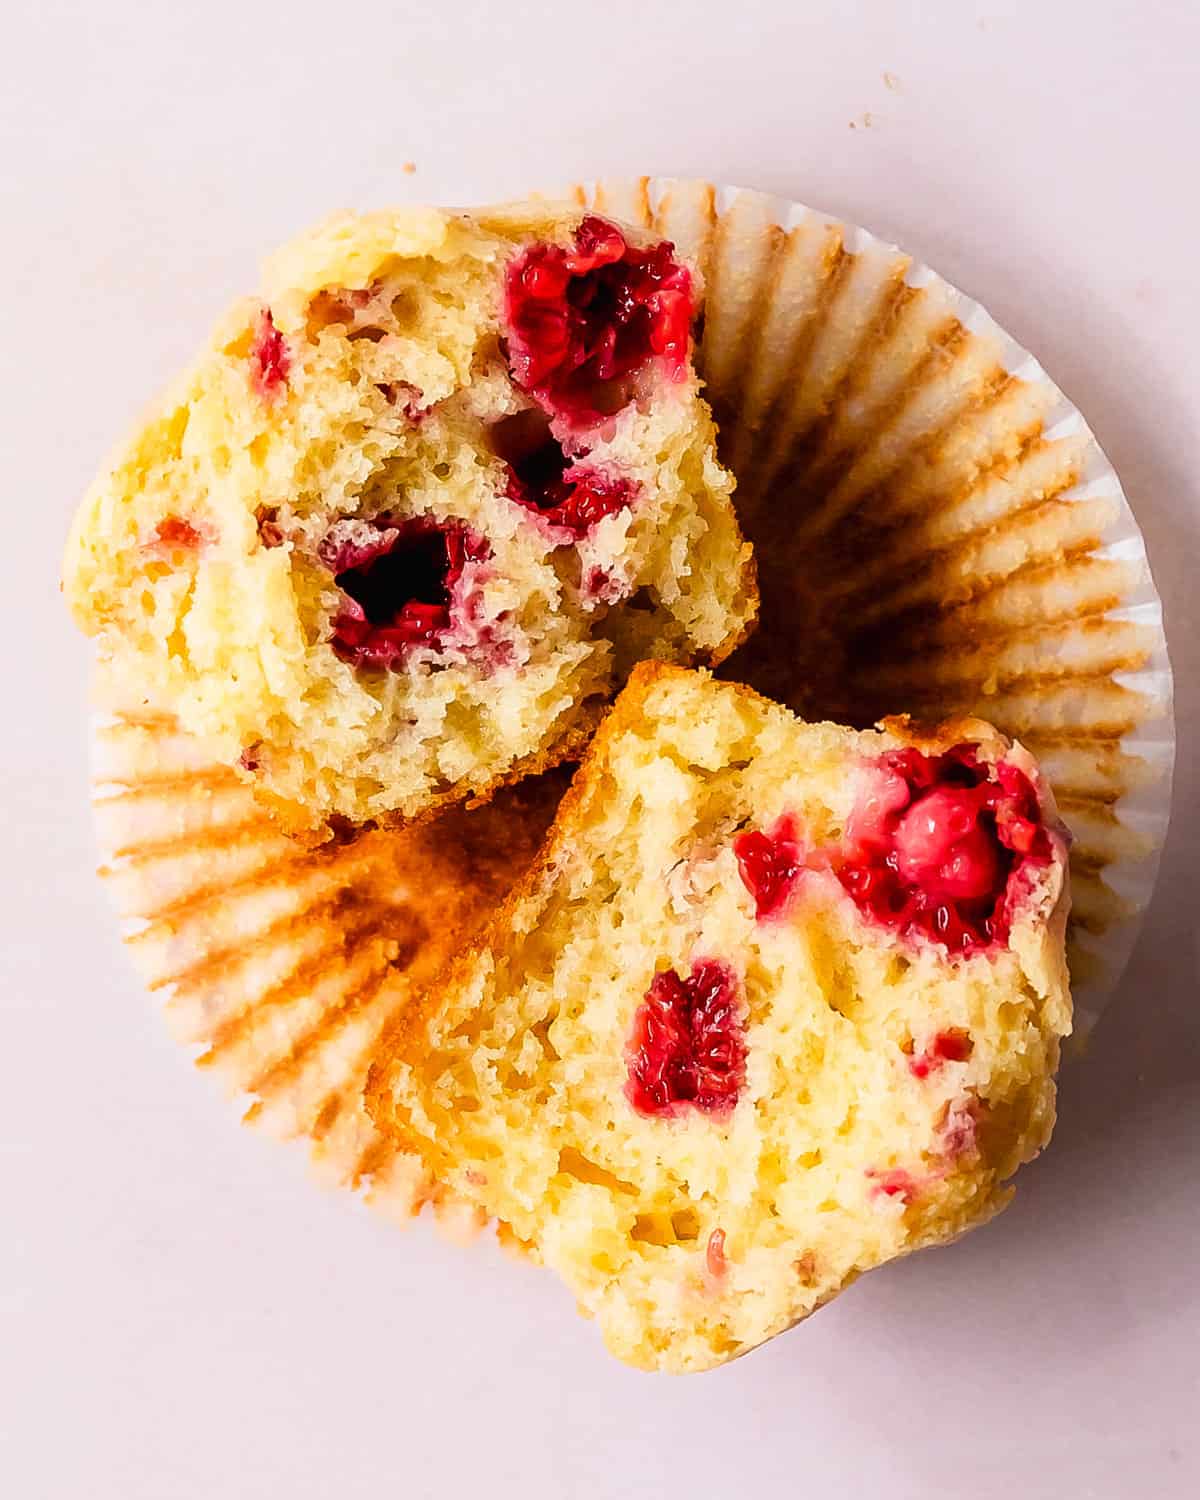 These raspberry muffins are light, fluffy and incredibly moist bakery style muffins filled with fresh or frozen raspberries and a hint of lemon.